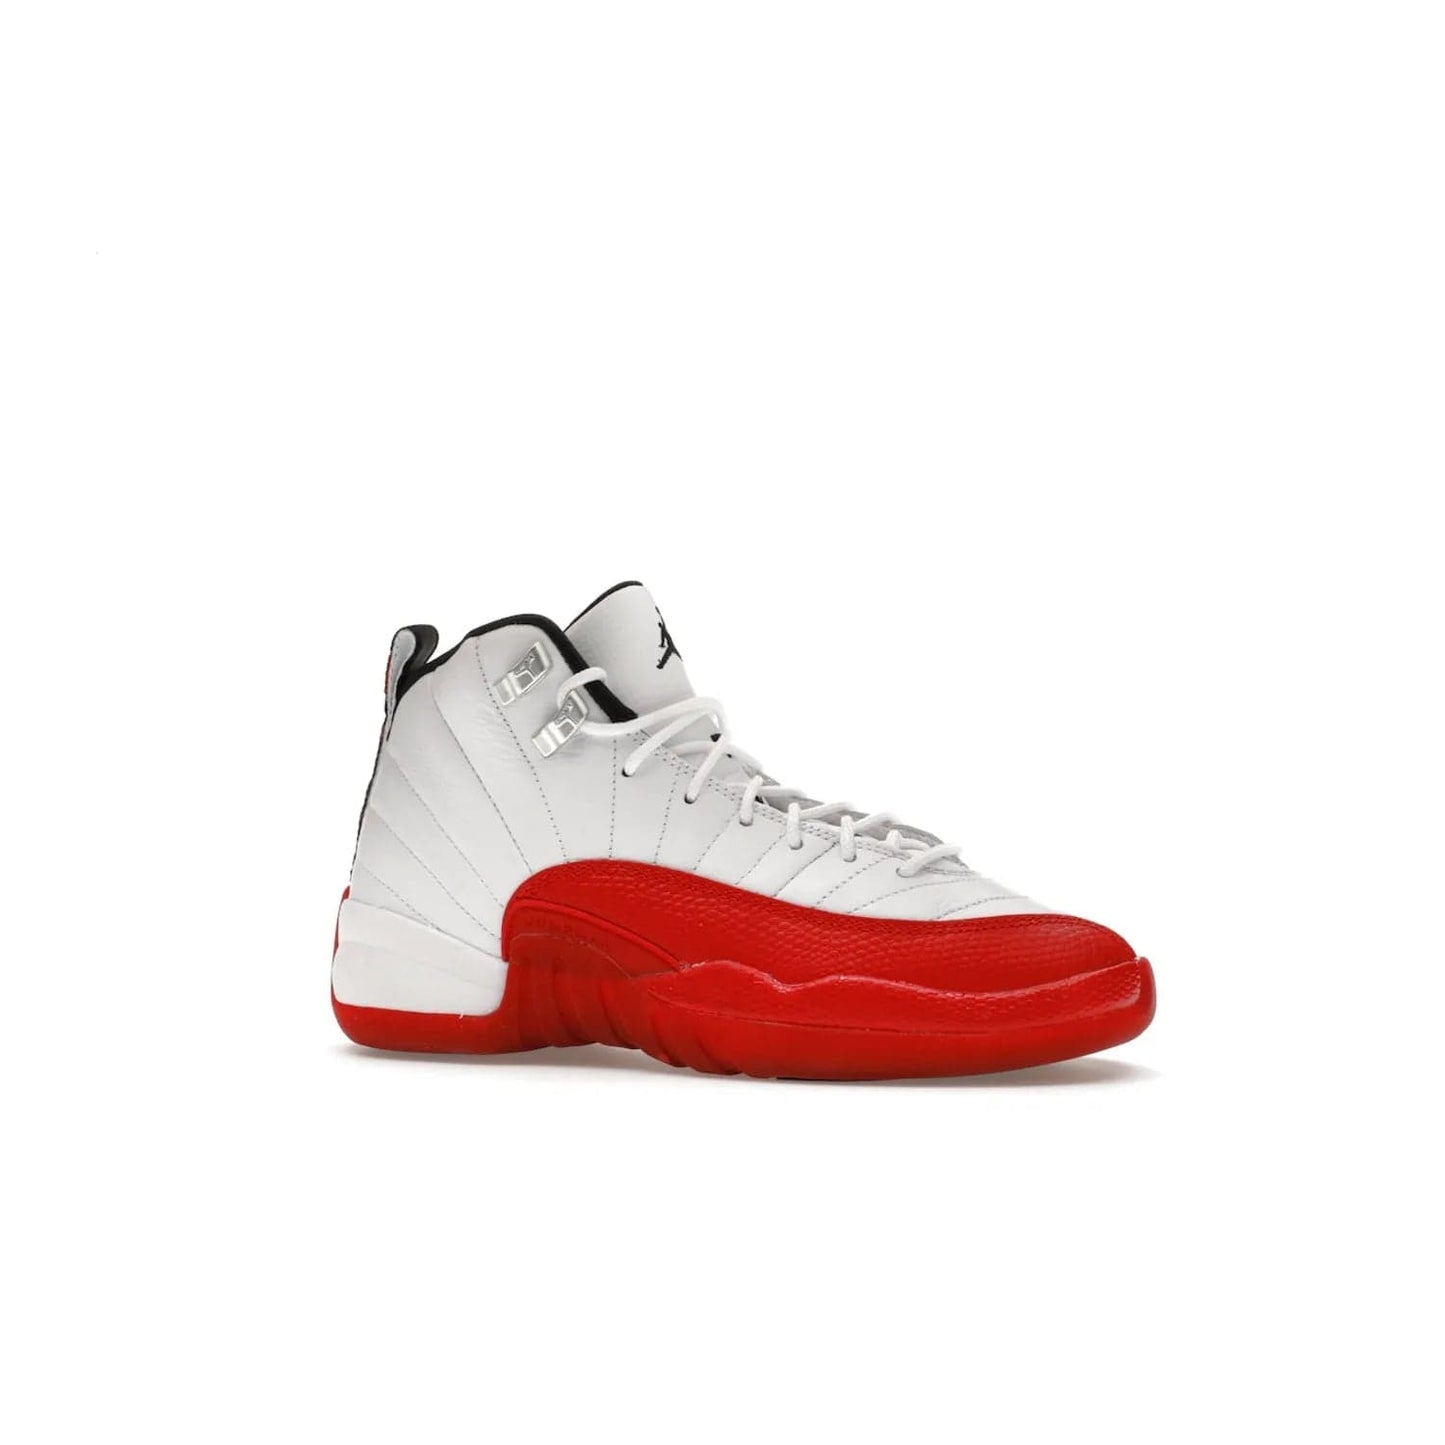 Jordan 12 Retro Cherry (2023) (GS) - Image 3 - Only at www.BallersClubKickz.com - Grab the Jordan 12 Retro Cherry (2023) (GS) and show off your signature style with these iconic kicks. Dressed in White, Black and Varsity Red, these timeless kicks are sure to turn heads. Available October 28, 2023.